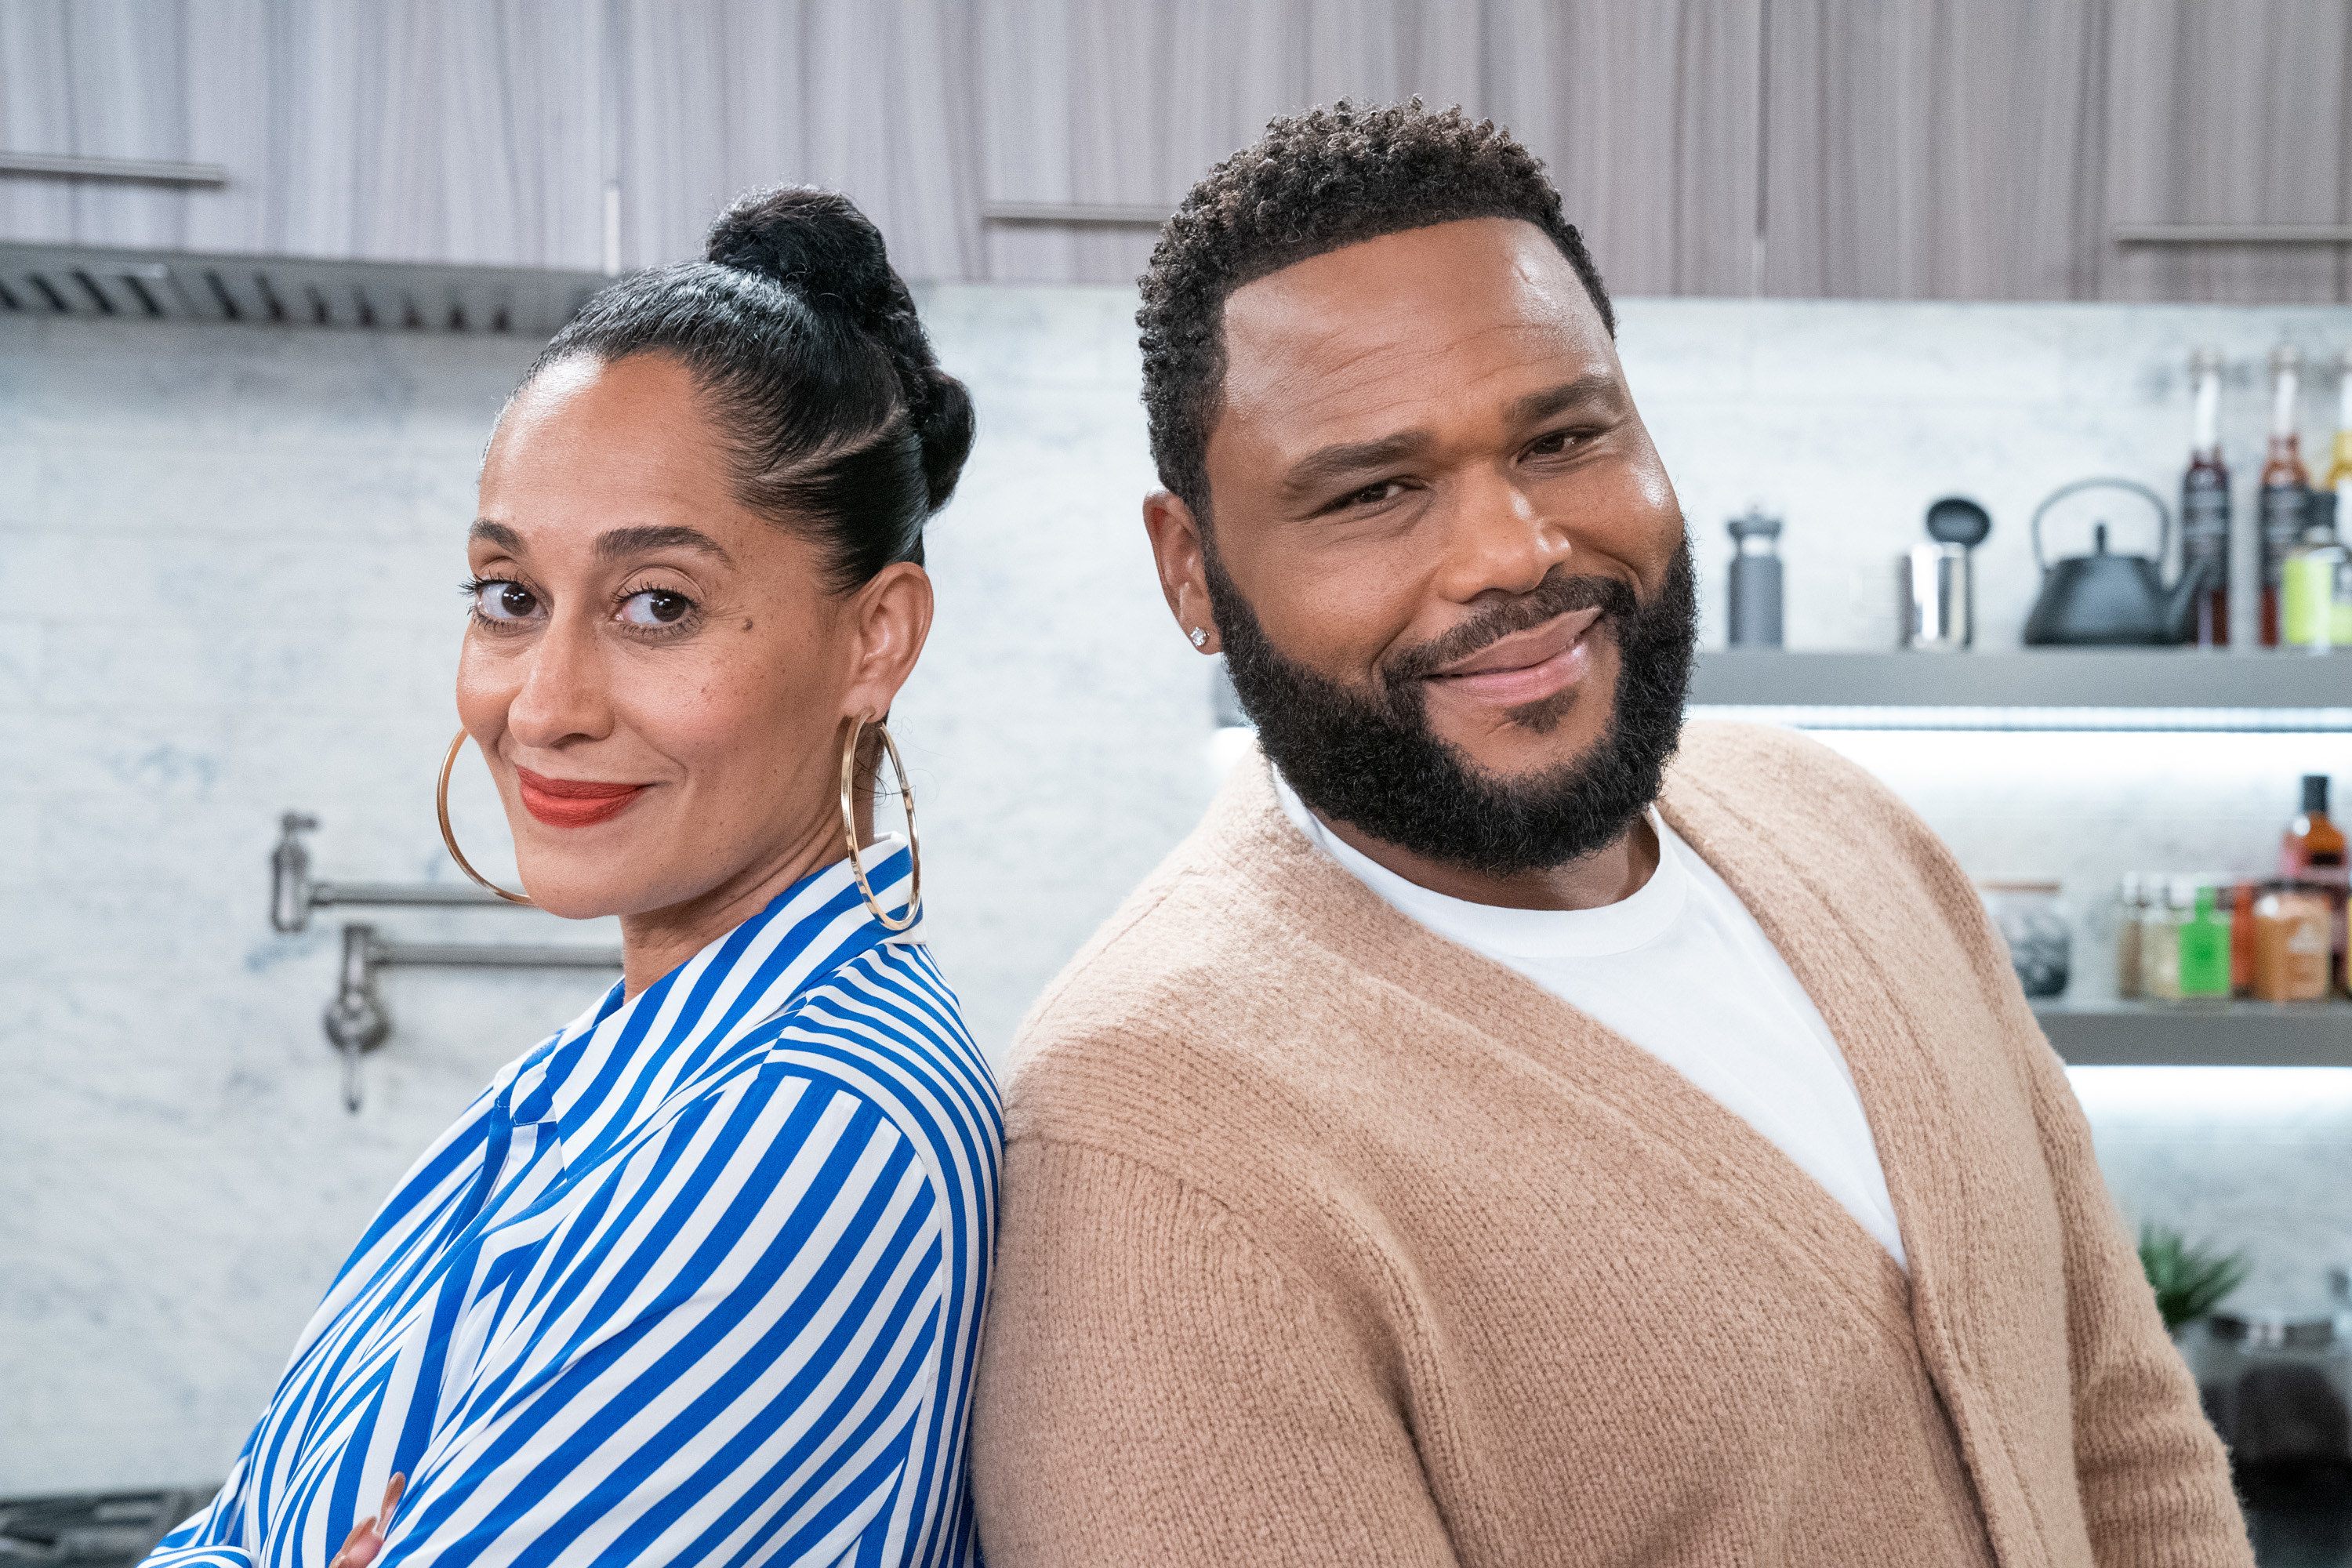 Tracee and Anthony smile while standing back to back